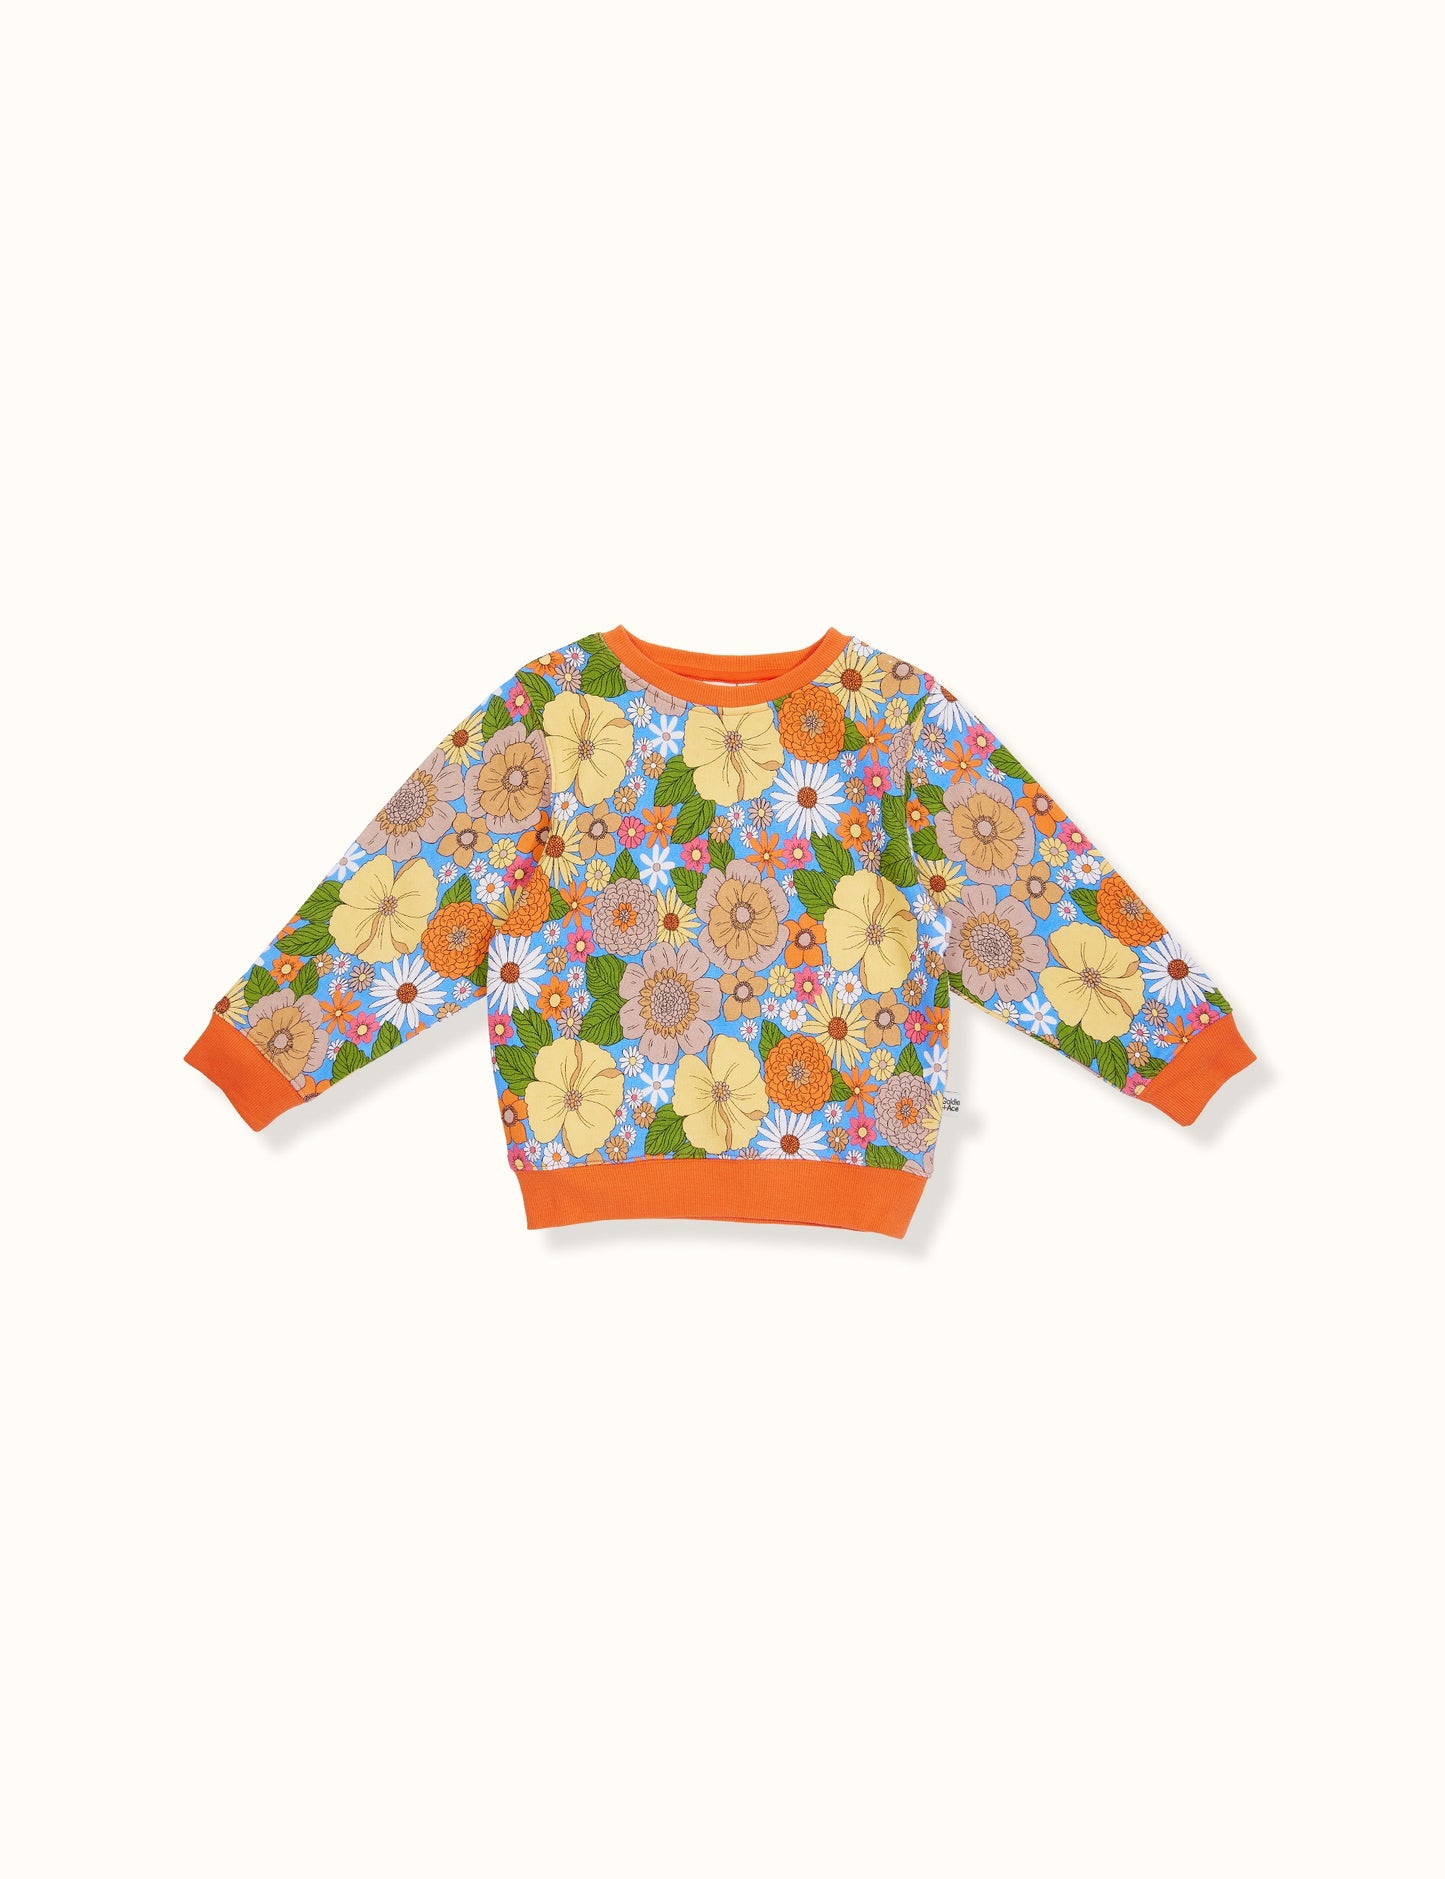 Goldie + Ace - Zoe Floral Sweater